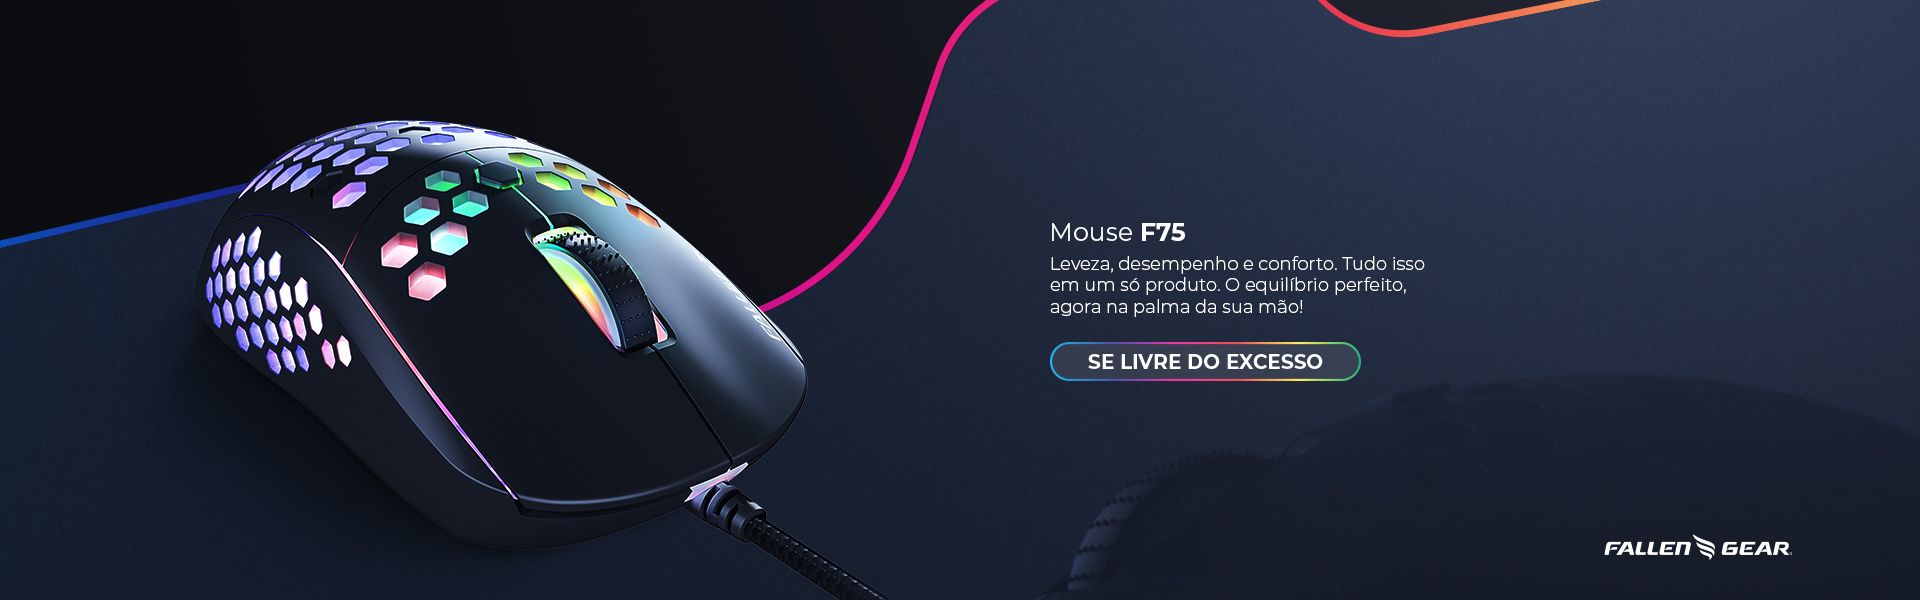 Mouse F75